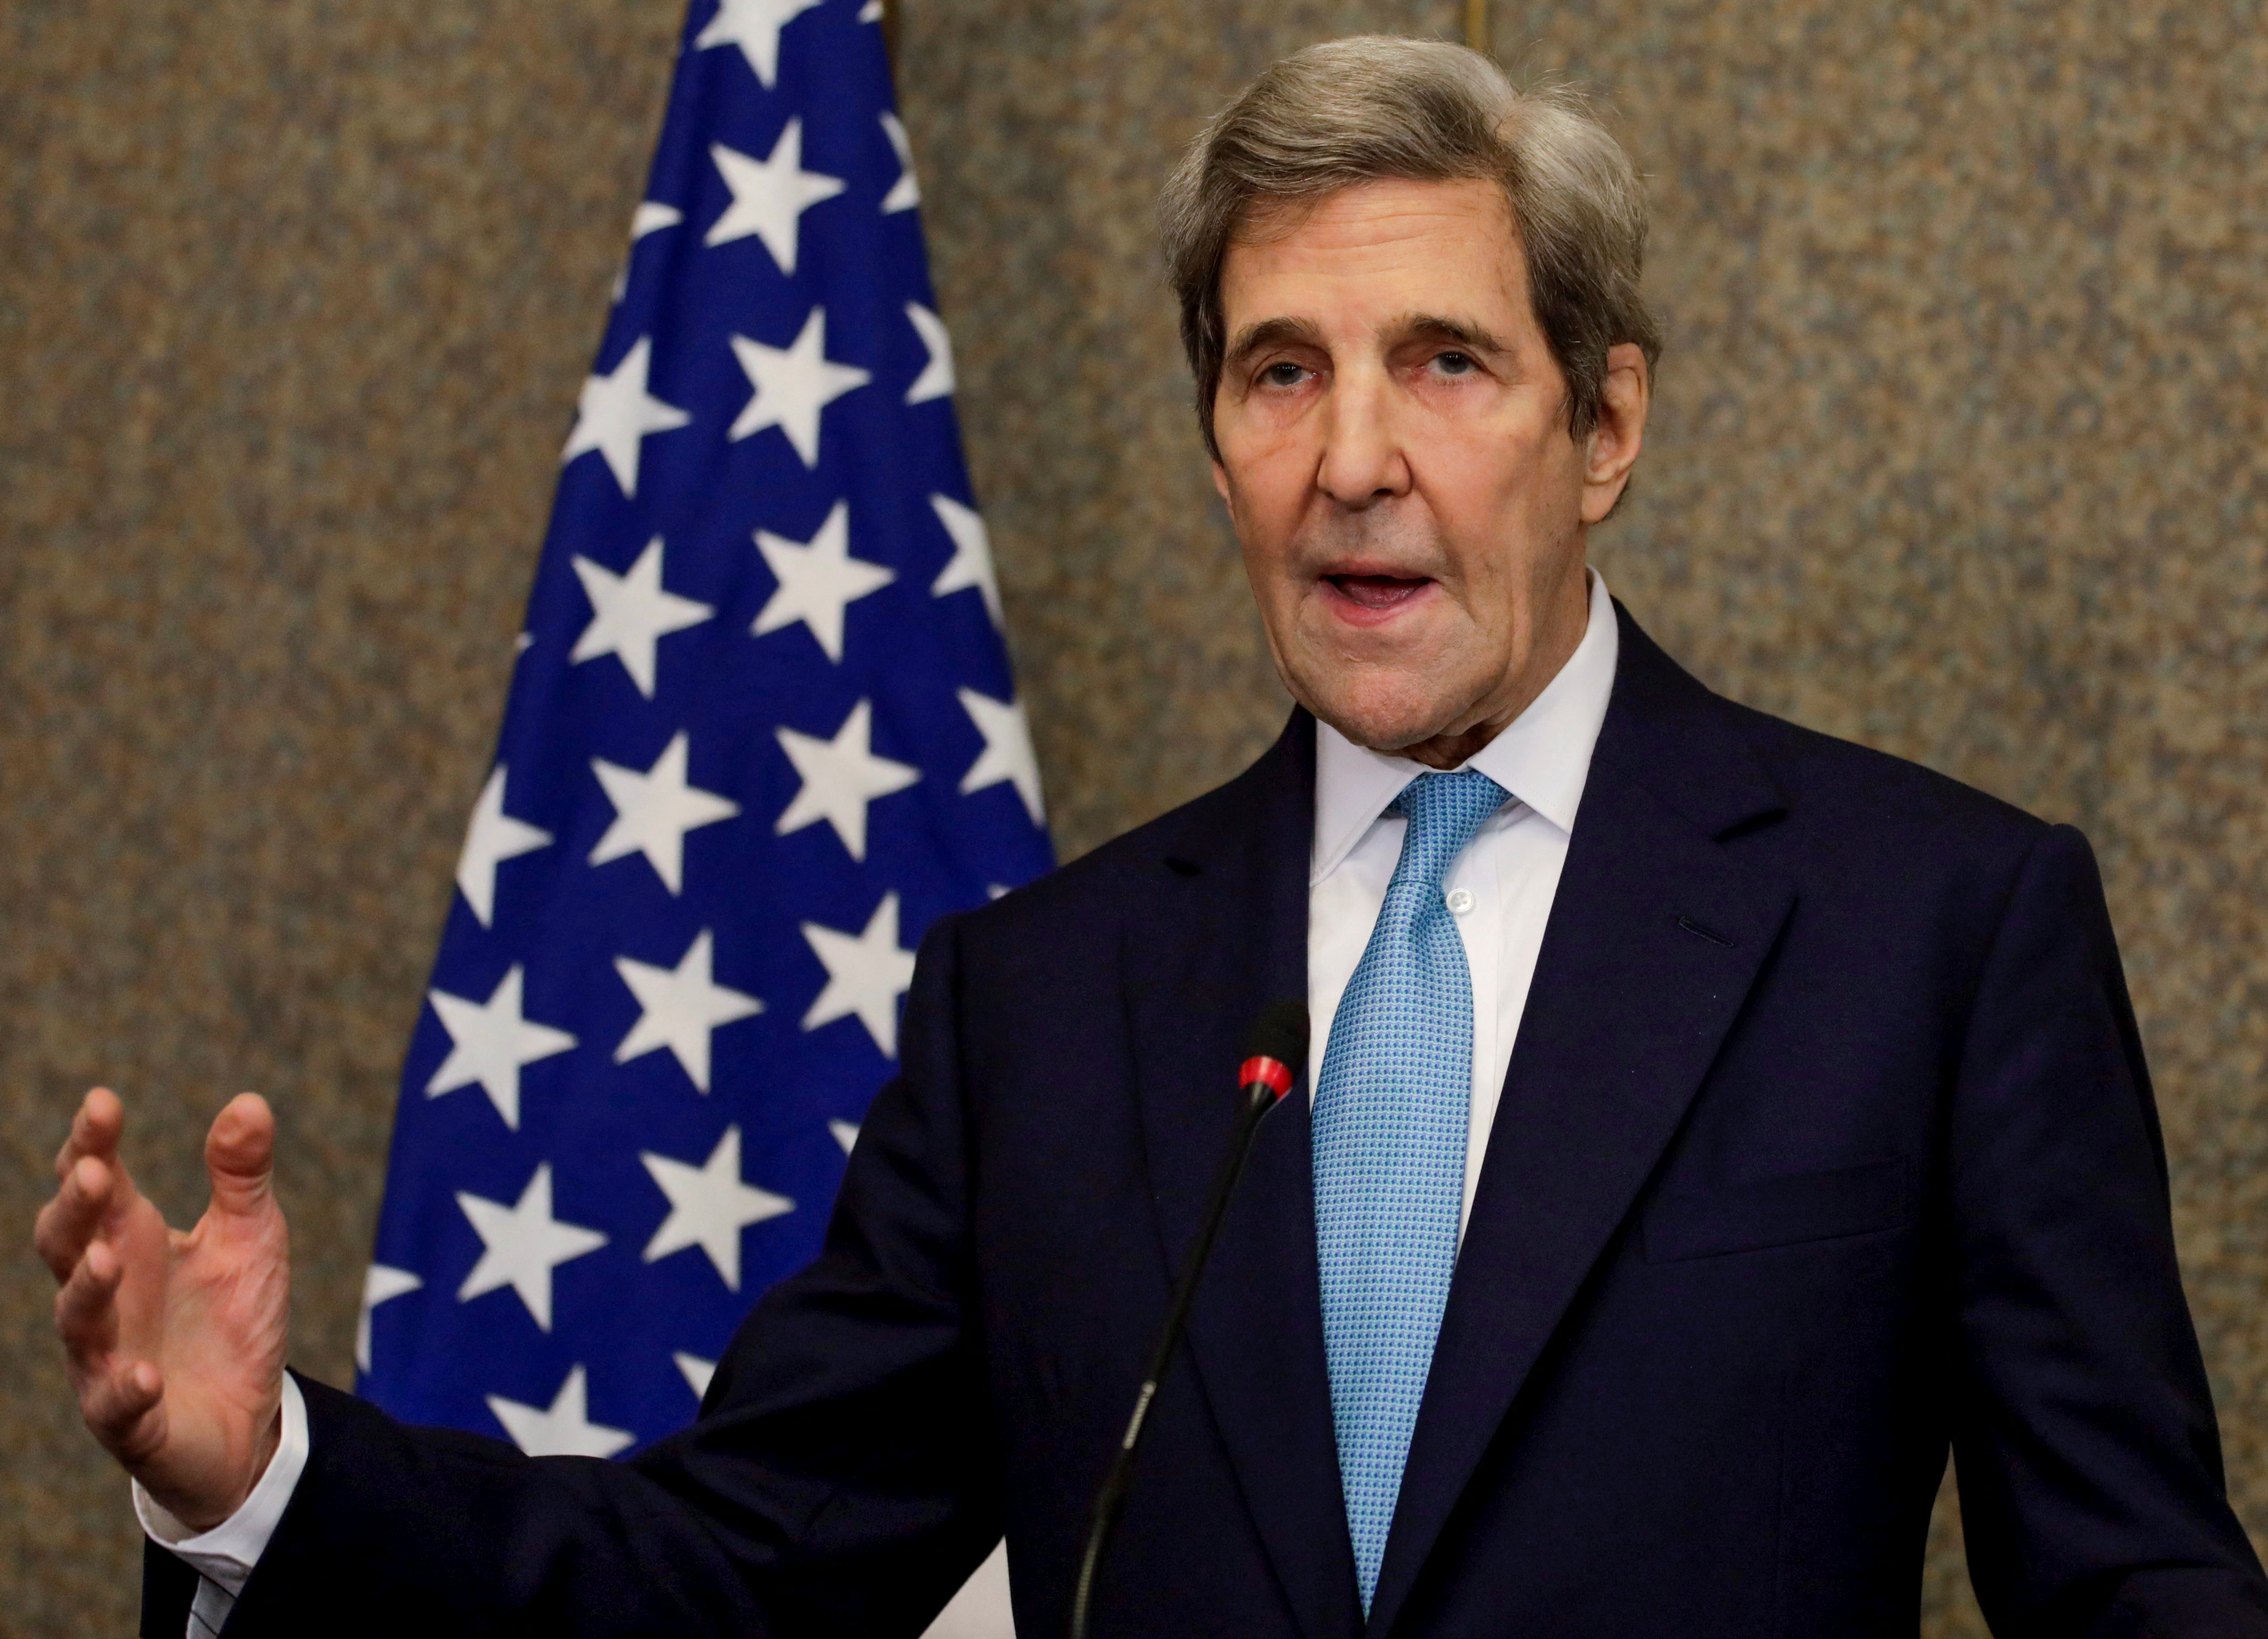 U.S. Special Presidential Envoy for Climate John Kerry gestures during a news conference with Egyptian Foreign Minister Sameh Shoukry, in Cairo